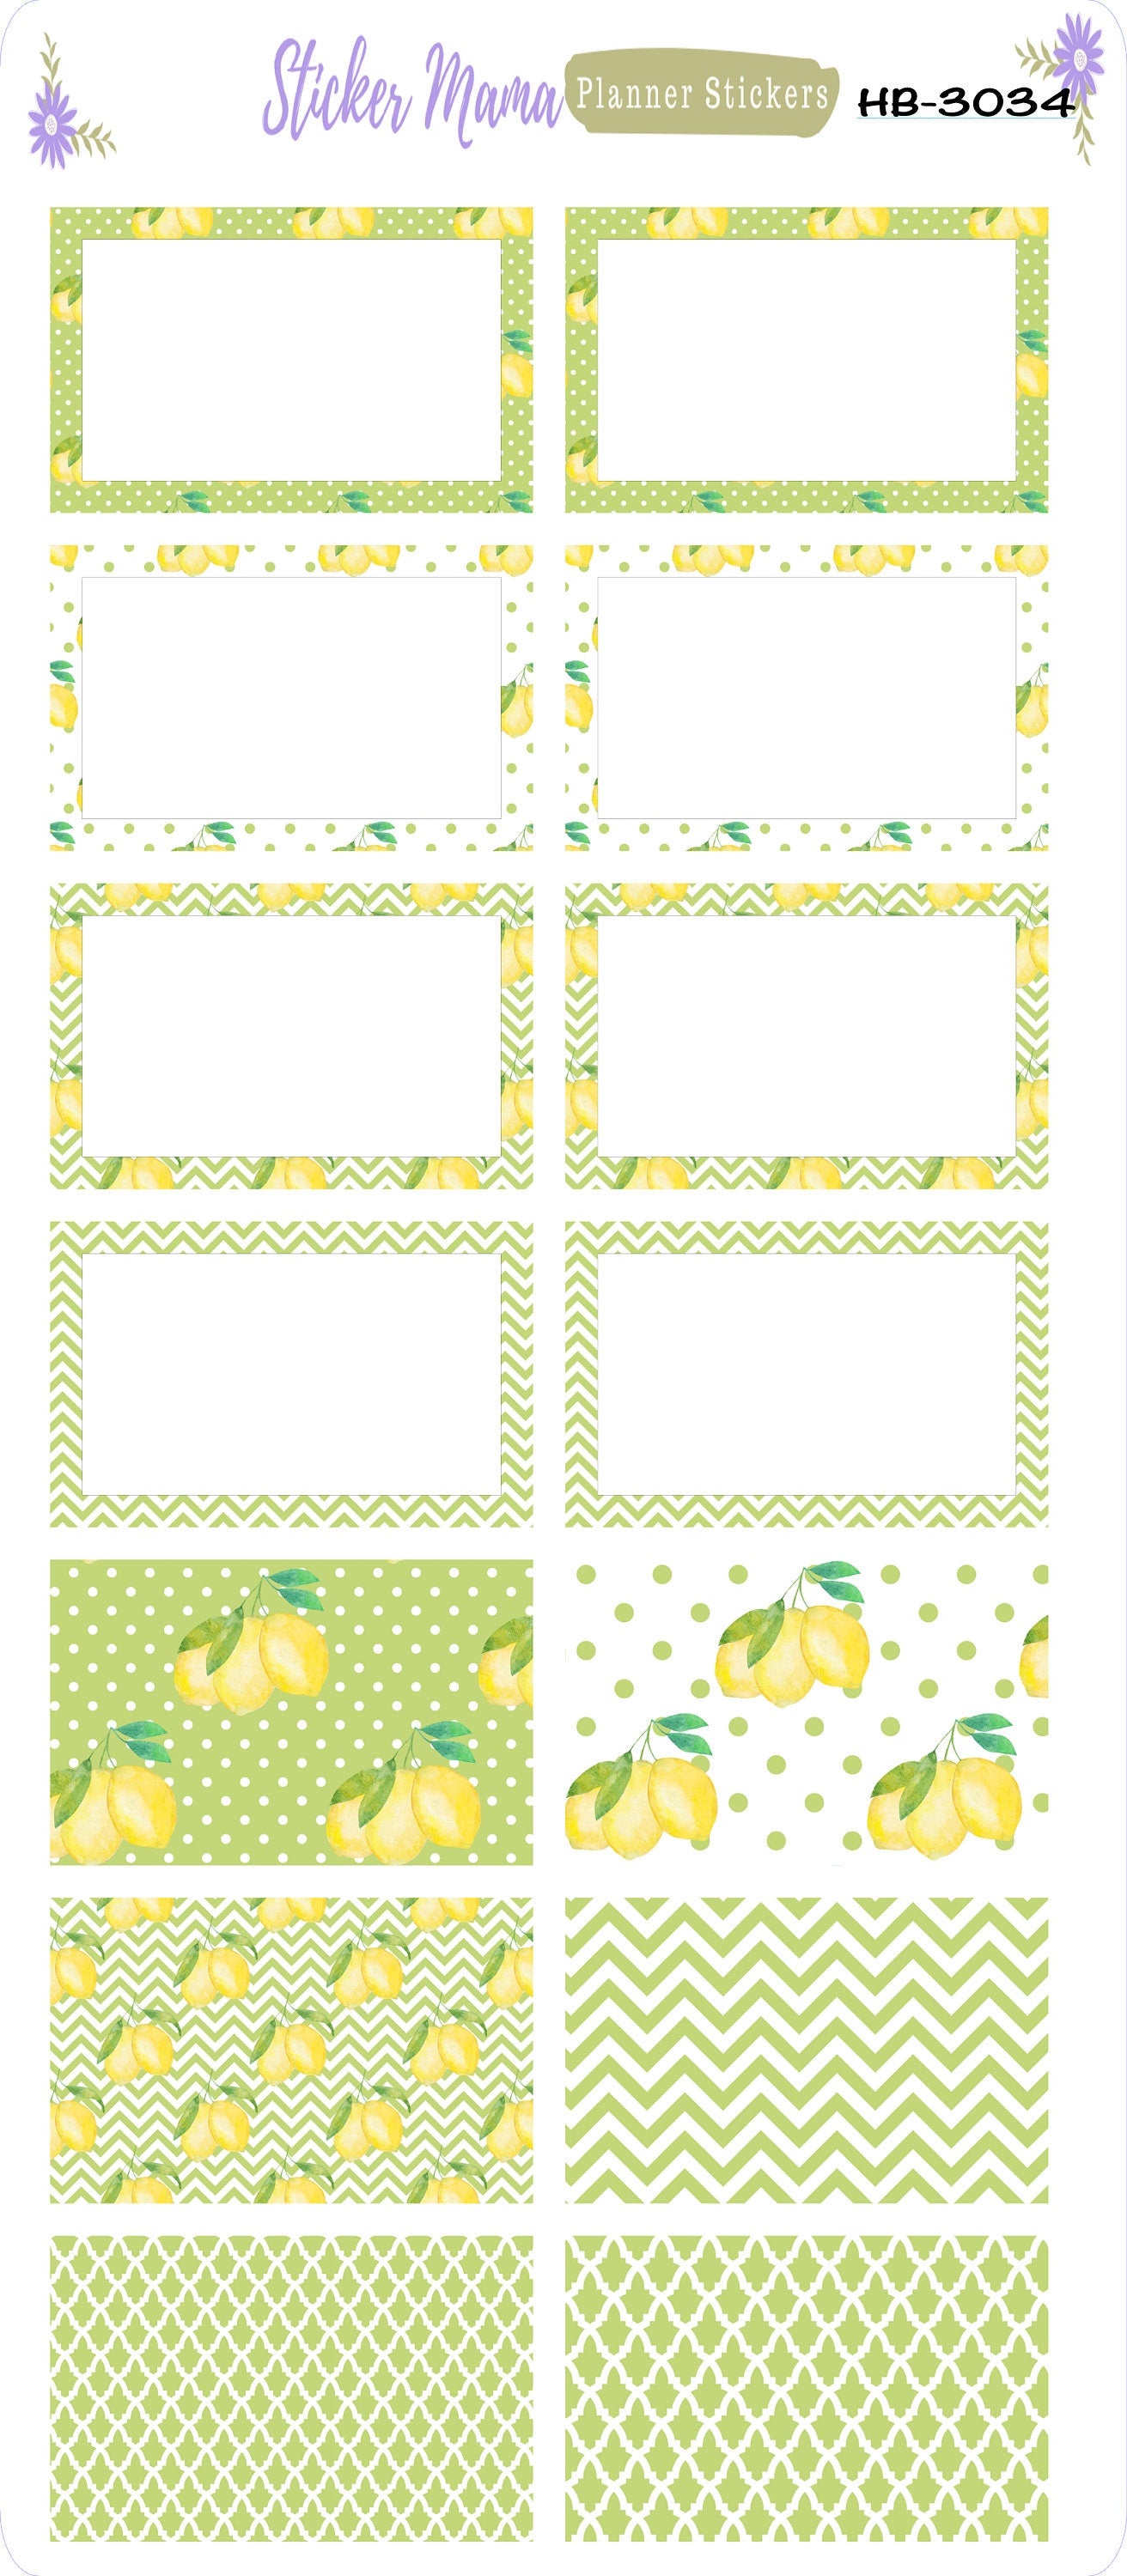 BL-3034 - HB-3034 Watercolor Lemons Basic Label Stickers -  - Half Boxes - Planner Stickers - Full Box for Planners